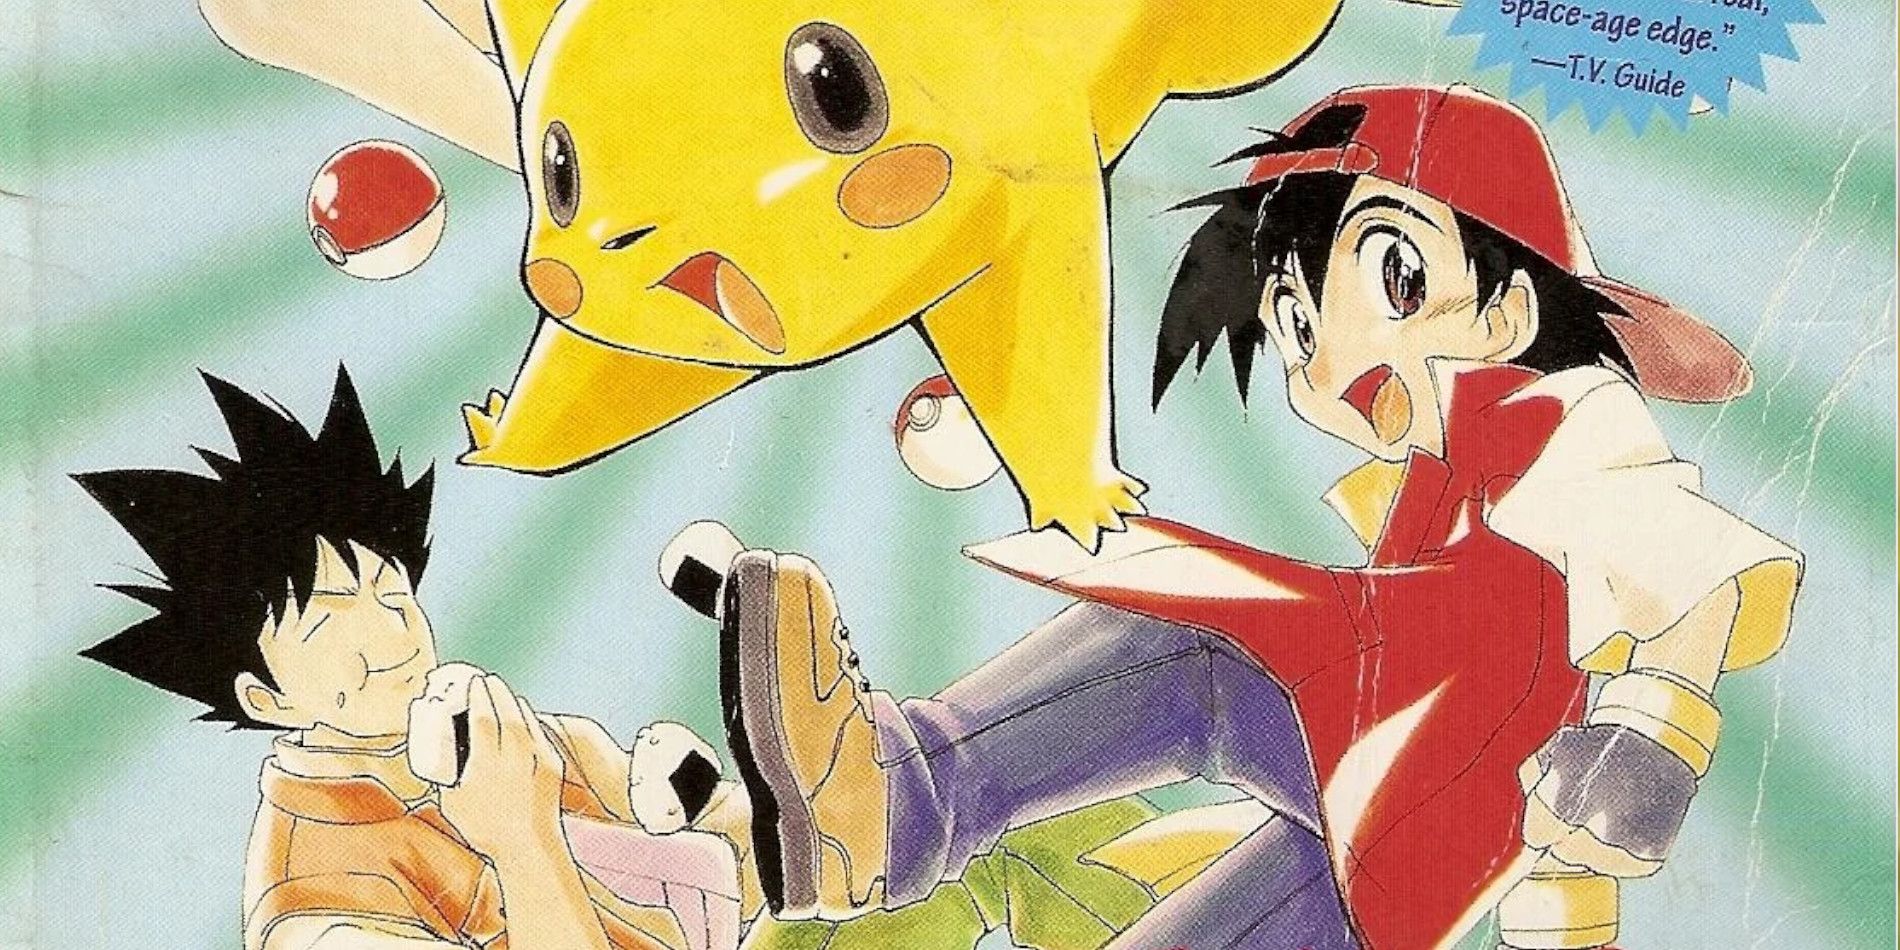 Pikachu, Ash, and Brock on the cover of The Electric Tale of Pikachu manga